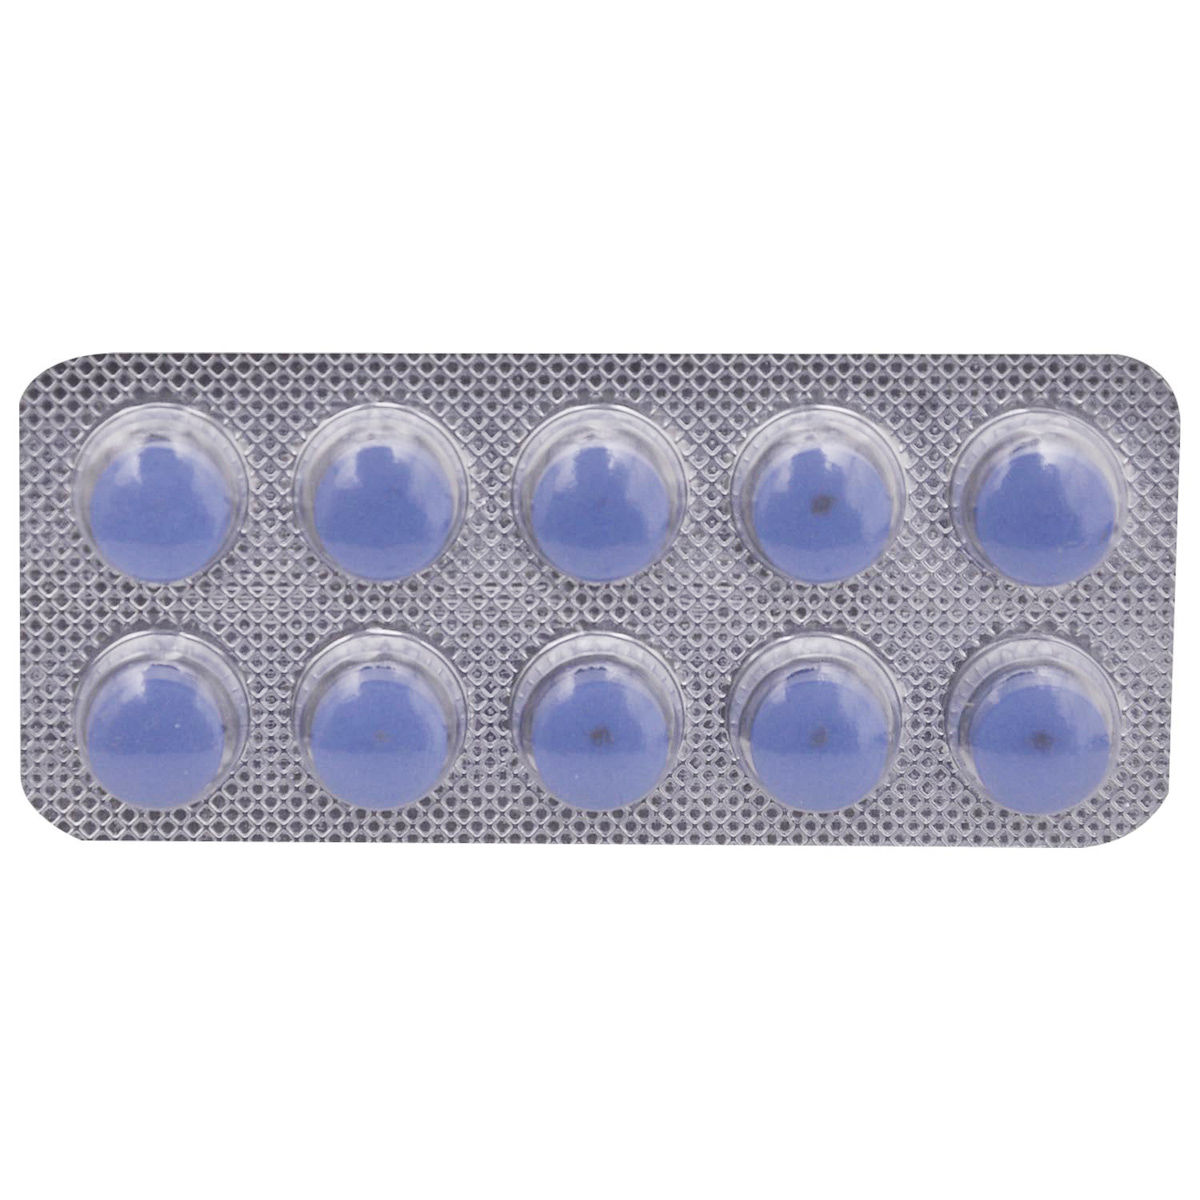 Lacoset 150 Tablet 10's, Pack of 10 TABLETS